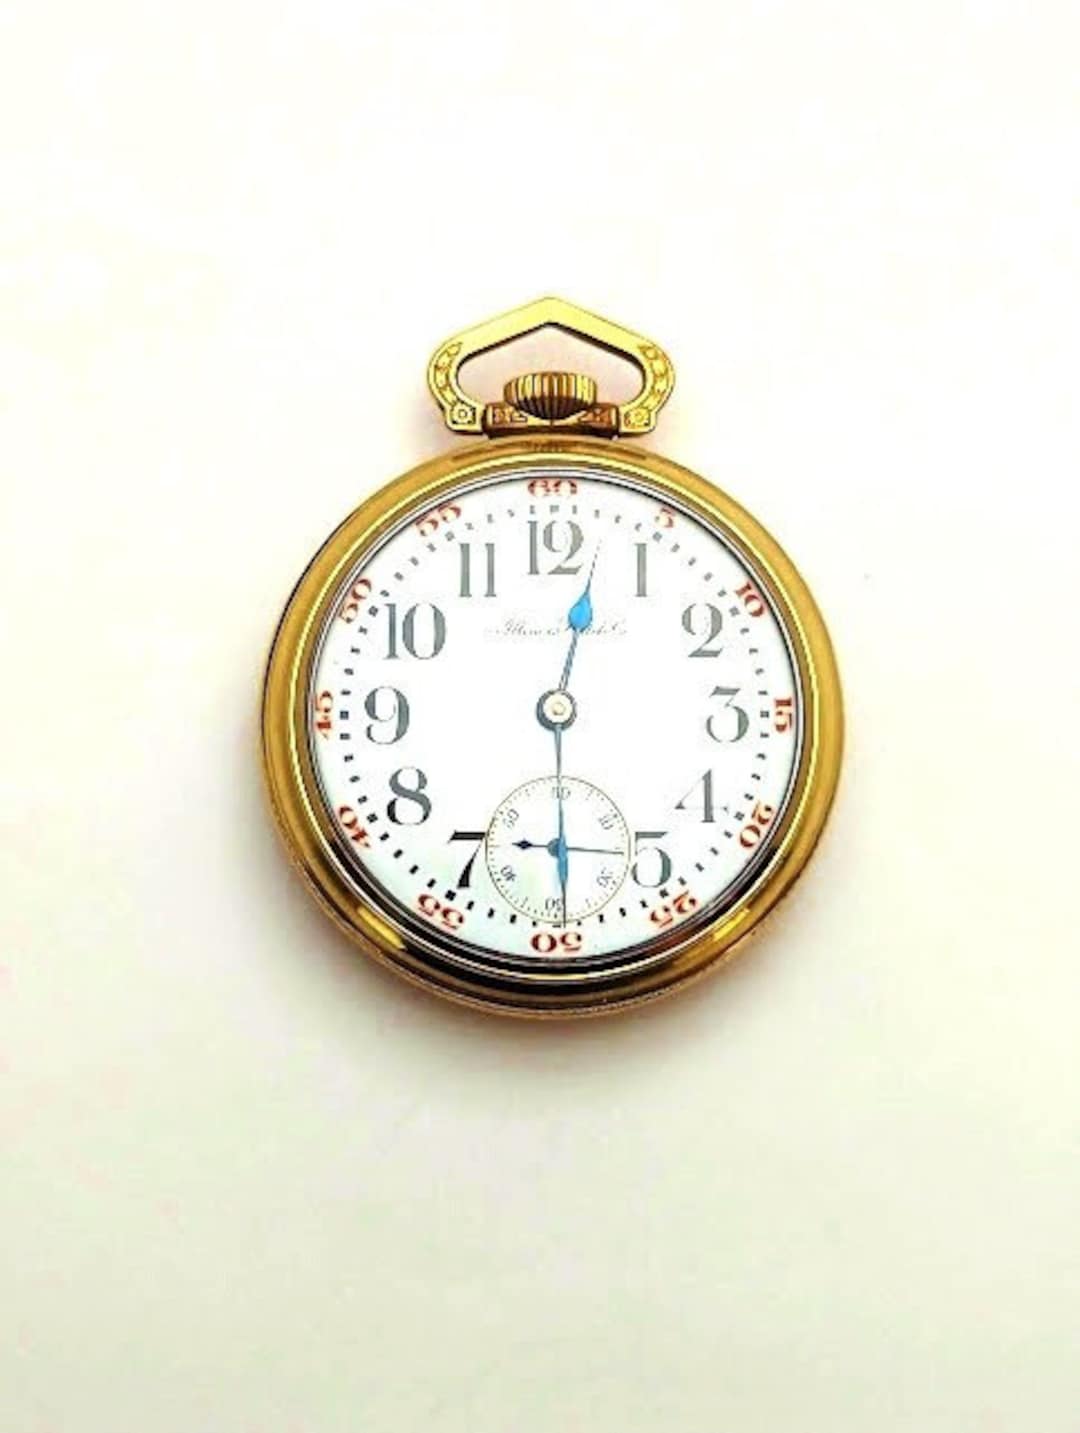 Vintage Illinois 18S Pocket Watch 1910's Vintage Watches - Etsy